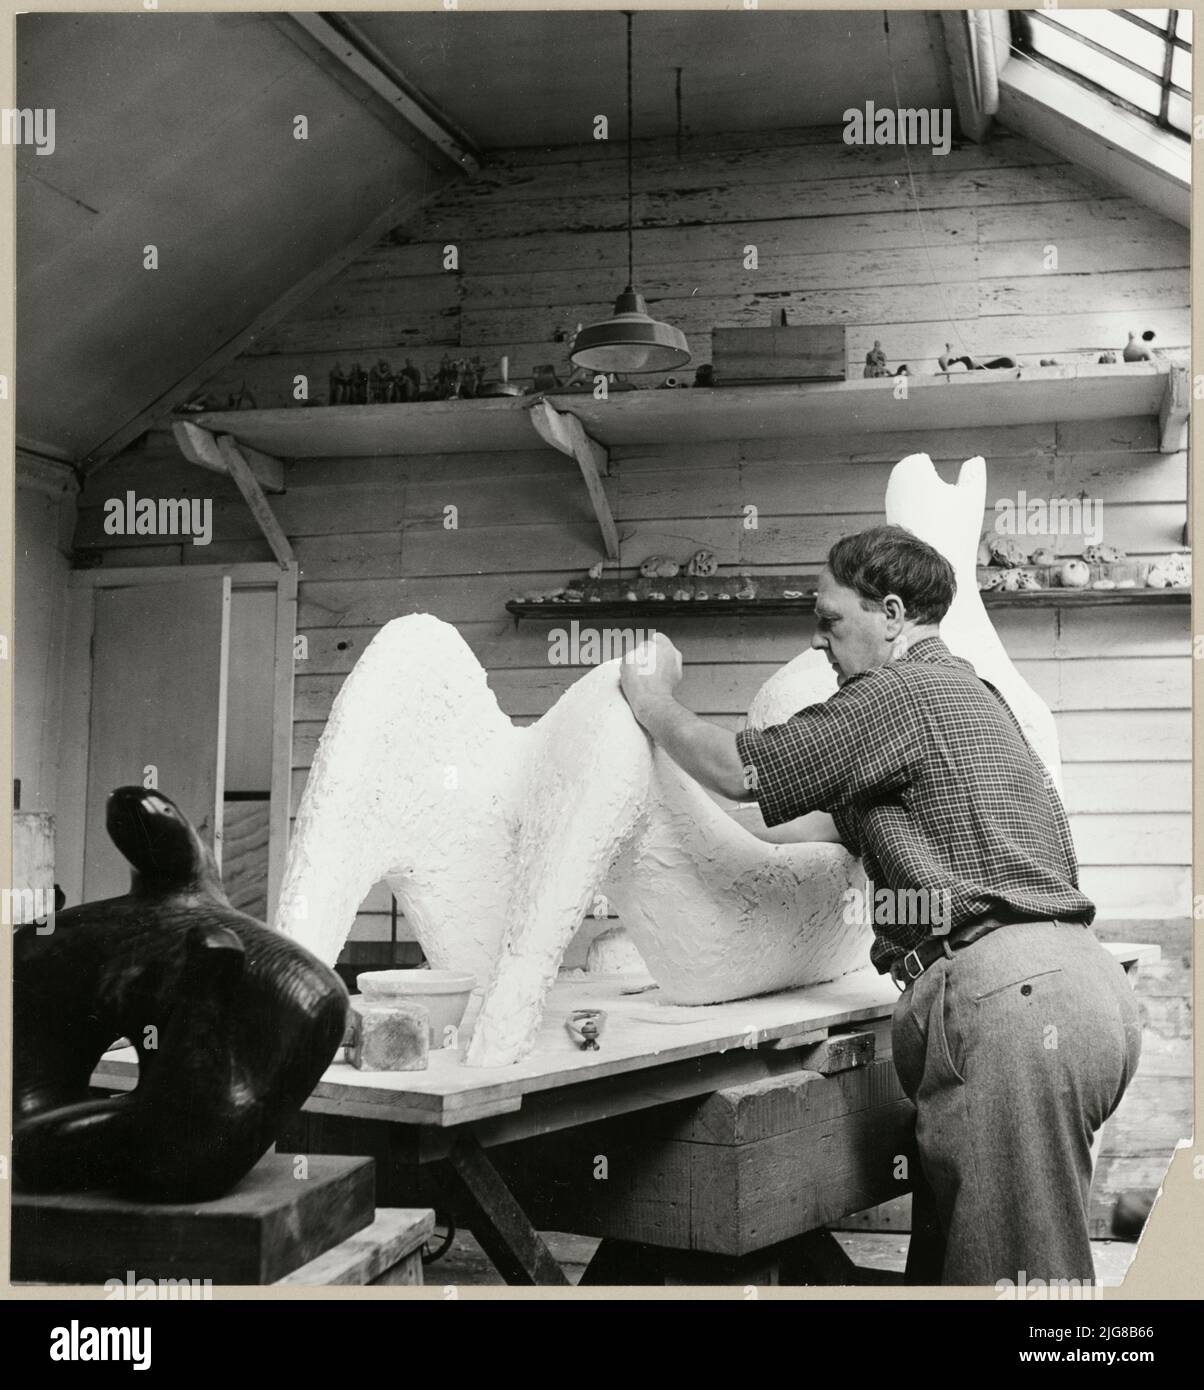 Hoglands, Perry Green, Much Hadham, East Hertfordshire, Hertfordshire, 03-10-1950. Henry Moore in his studio at Perry Green working on his sculpture 'Reclining Figure', commissioned by the Festival of Britain 1951 for the South Bank Exhibition, London. The original caption reads: &quot;Henry Moore in his studio working on his new sculpture commissioned by the Festival of Britain 1951 for the South Bank Exhibition, London.&quot; The final sculpture was created in bronze and had a surface decoration of thin string &quot;to define the form&quot;, which Moore described as &quot;[giving] the shape Stock Photo